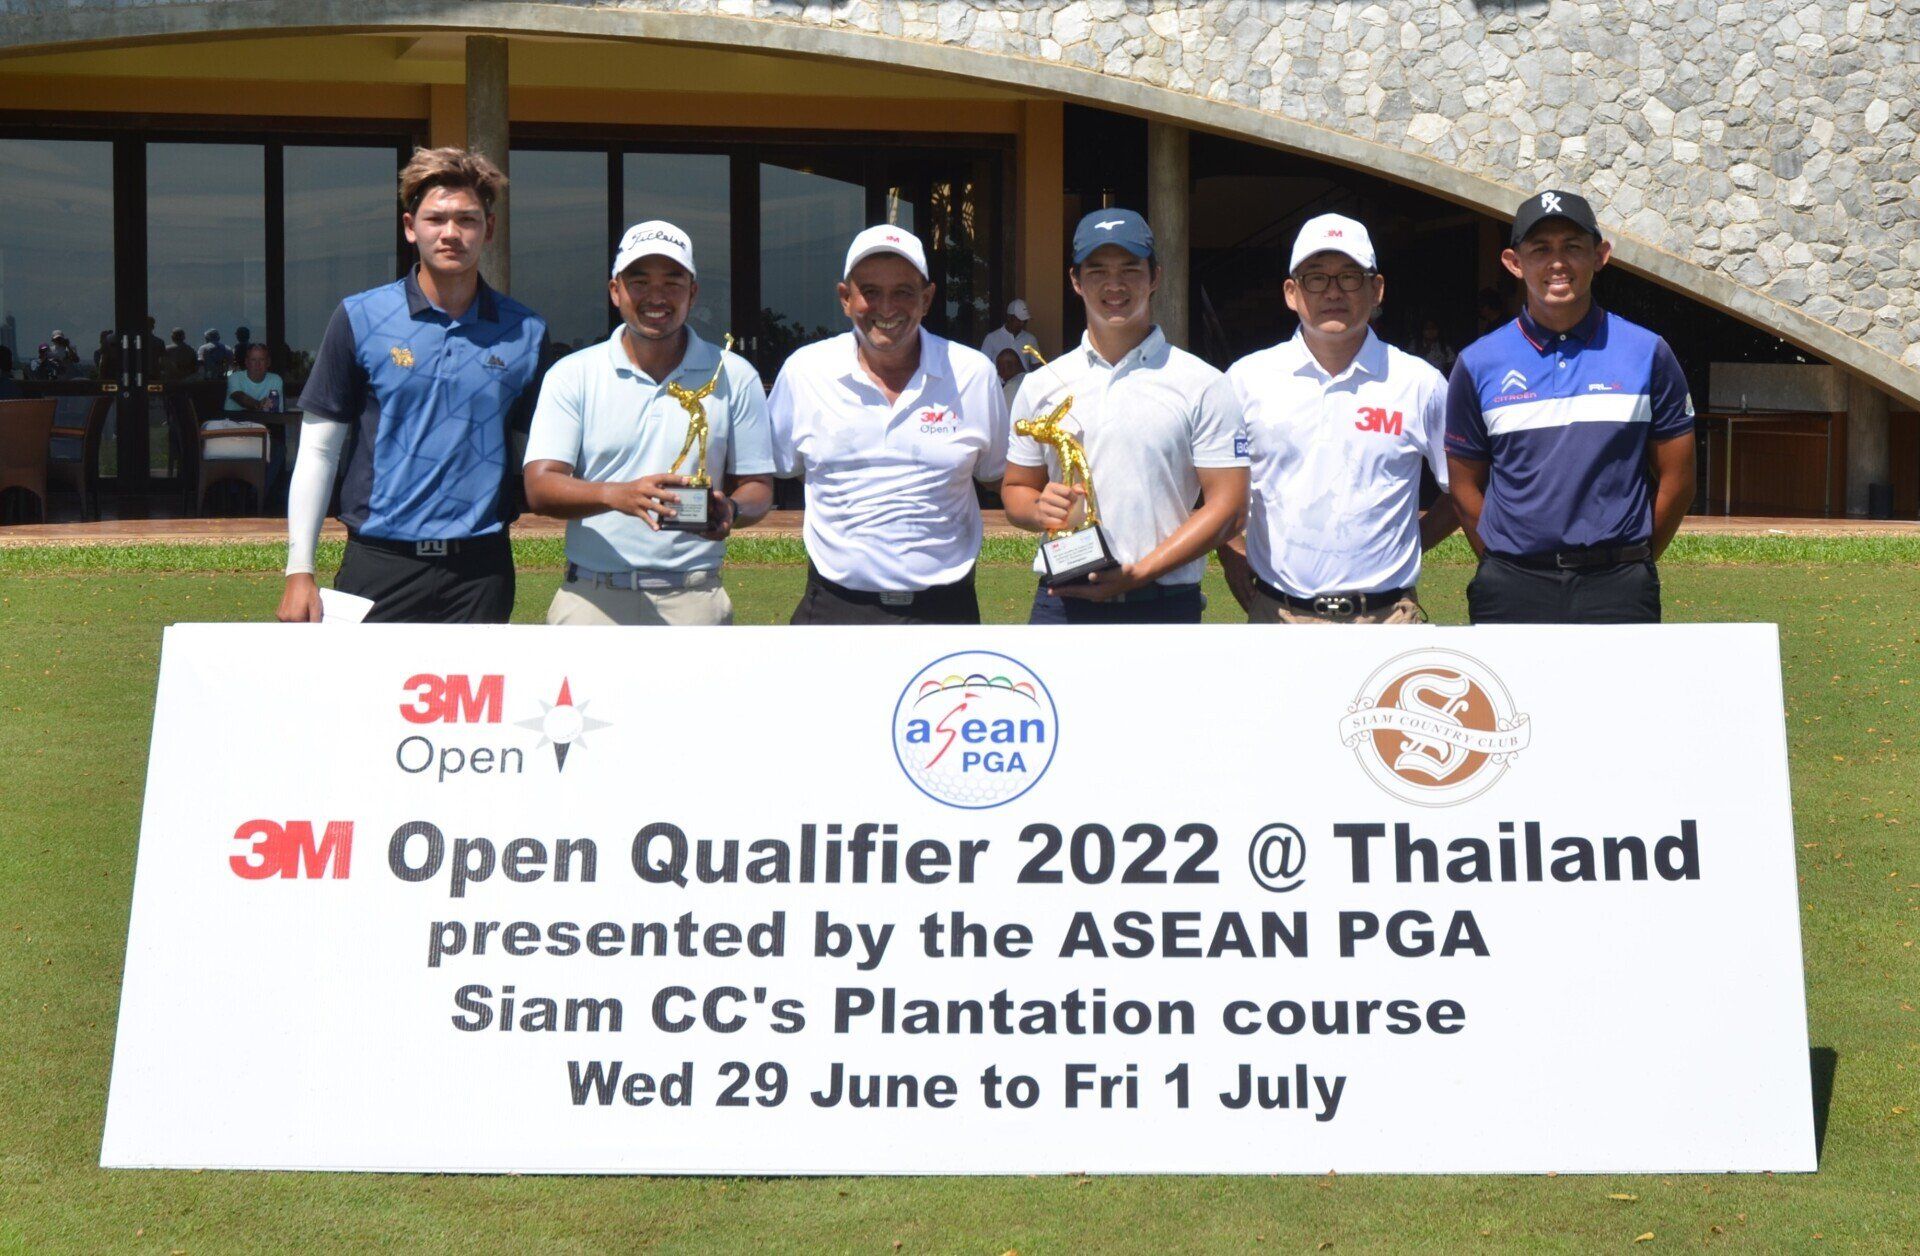 3M Open Qualifier Thailand 2022 presented by the ASEAN PGA